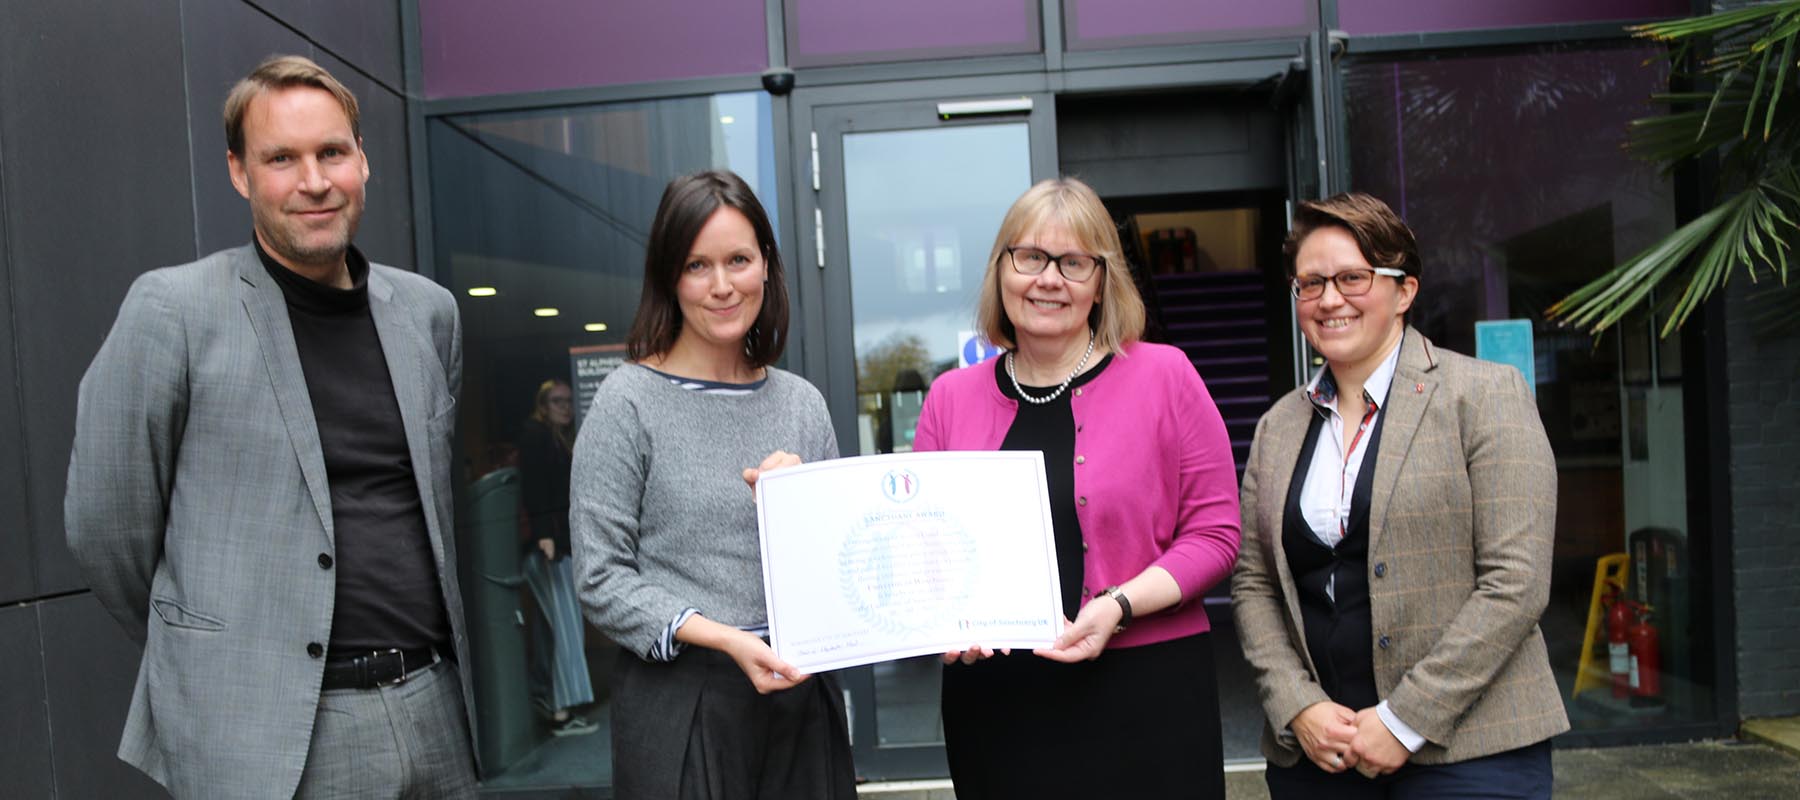 Joy Carter and Nicola Walters standing with University of Sanctuary certificate